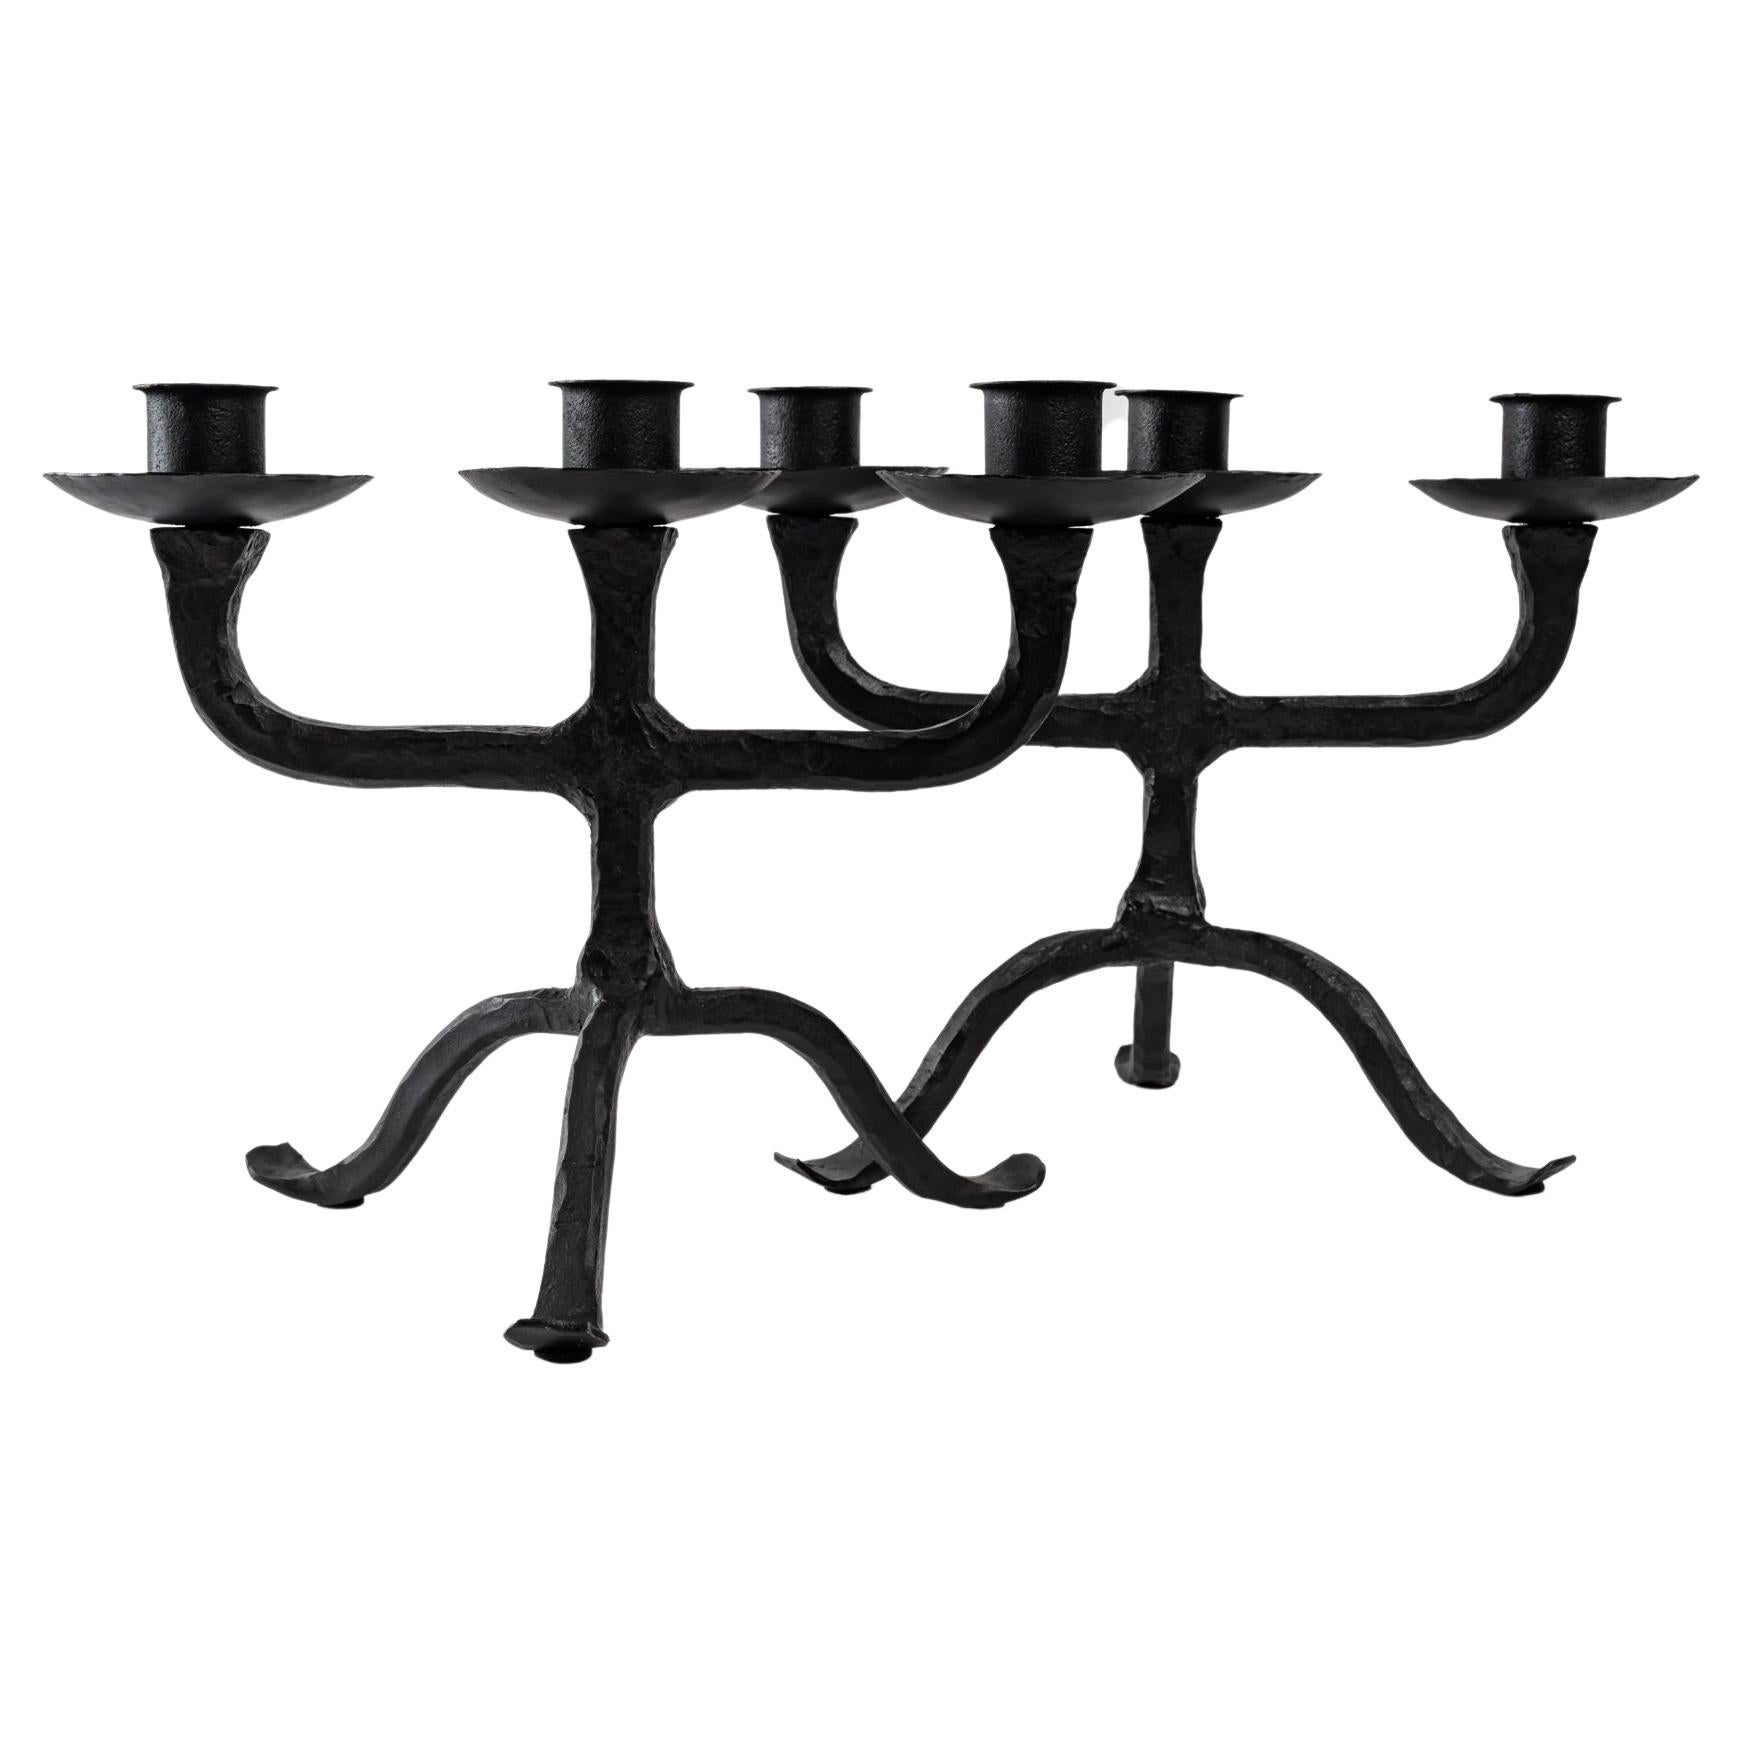 1950 Pair of wrought iron candlesticks from the Ateliers Marolles